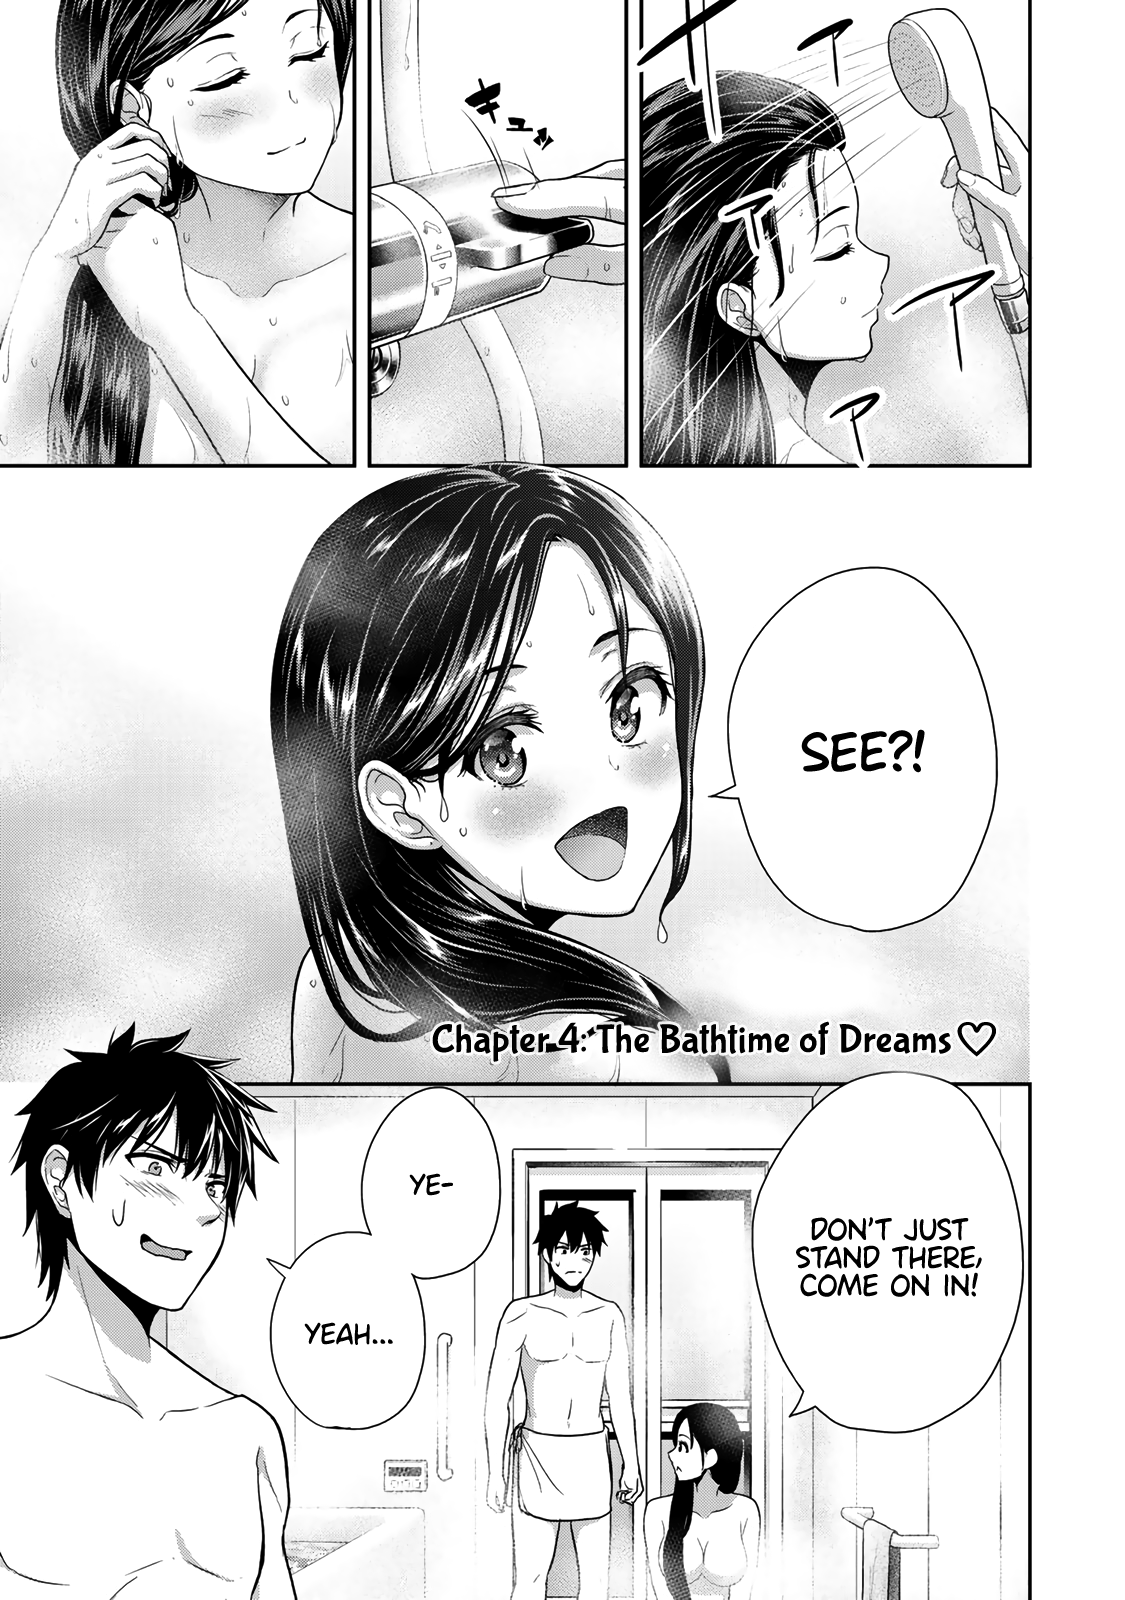 Fechippuru ~Our Innocent Love~ Vol.1 Chapter 4: The Bathtime Of Dreams - Picture 1